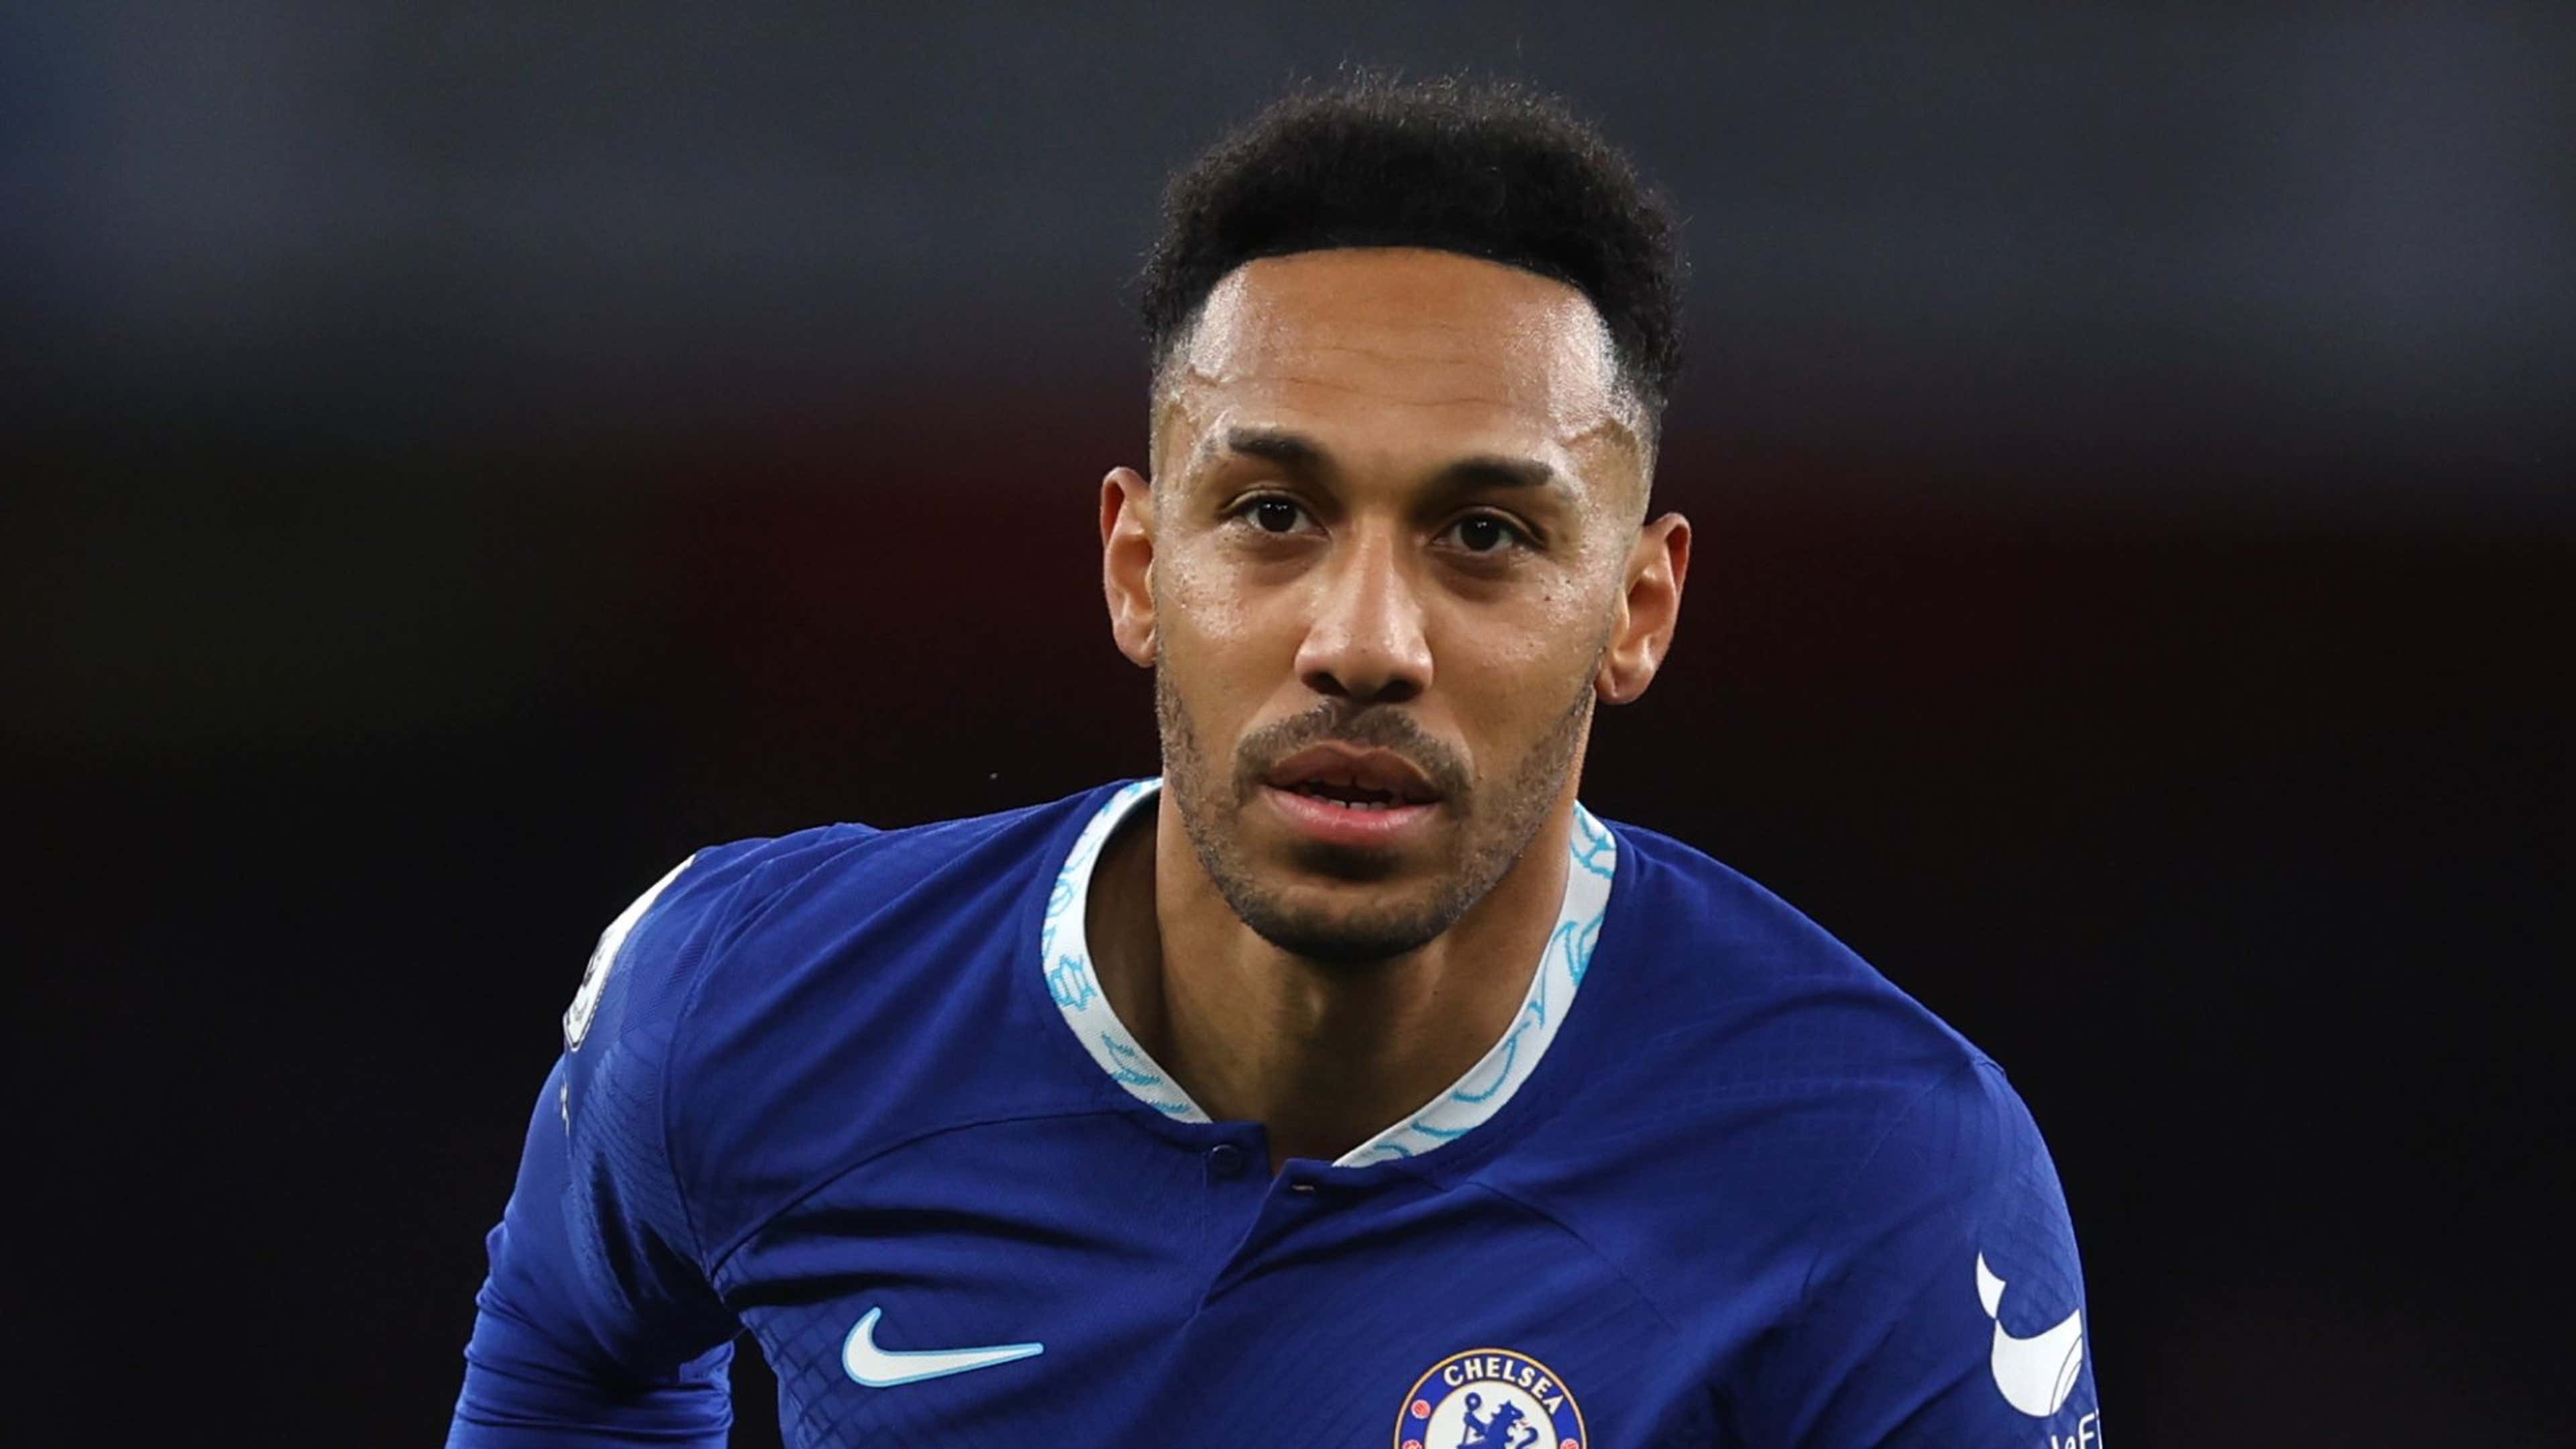 Pierre-Emerick Aubameyang gets a three-year deal at Marseille! Chelsea cut  losses on ex-Arsenal man as forward joins Ligue 1 side on free transfer